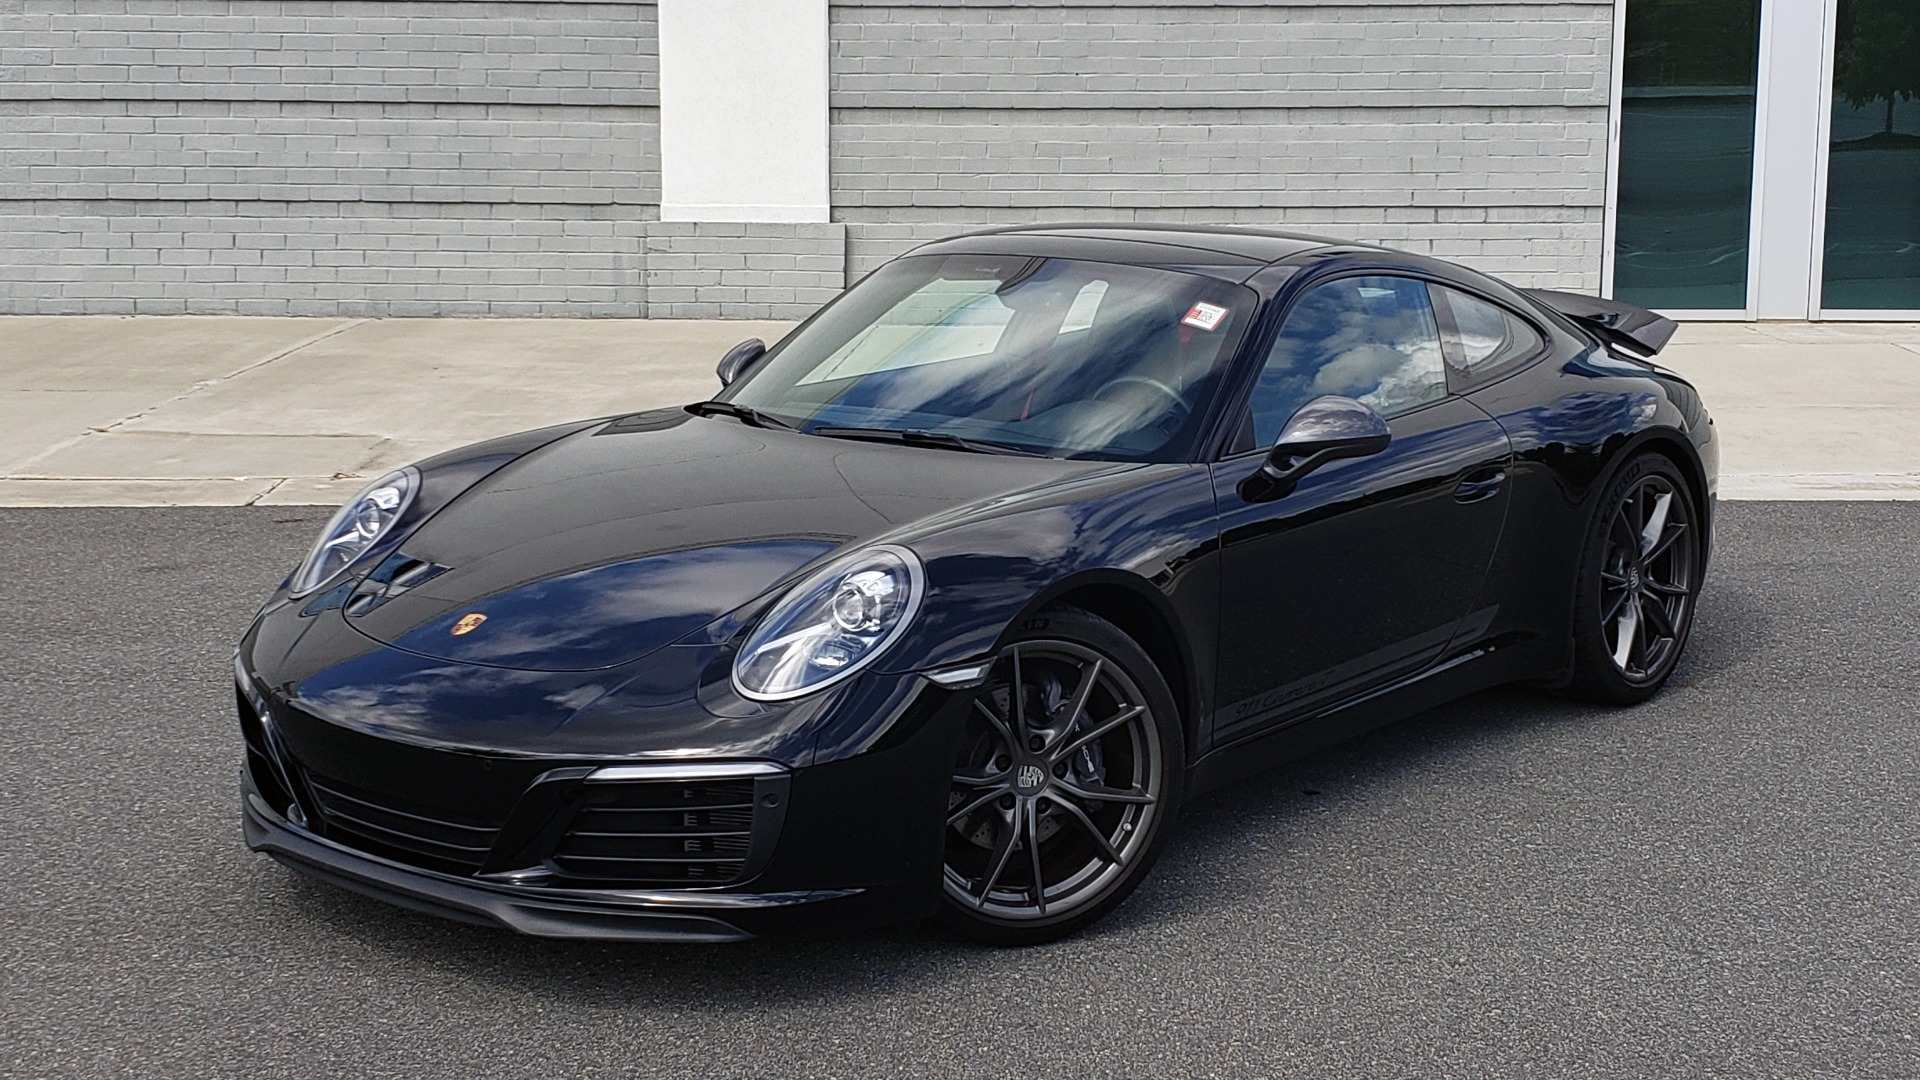 Used 2019 Porsche 911 CARRERA T / 3.0L H6 / MANUAL / PREMIUM / NAV / BOSE / SUNROOF / REARVIEW for sale Sold at Formula Imports in Charlotte NC 28227 2